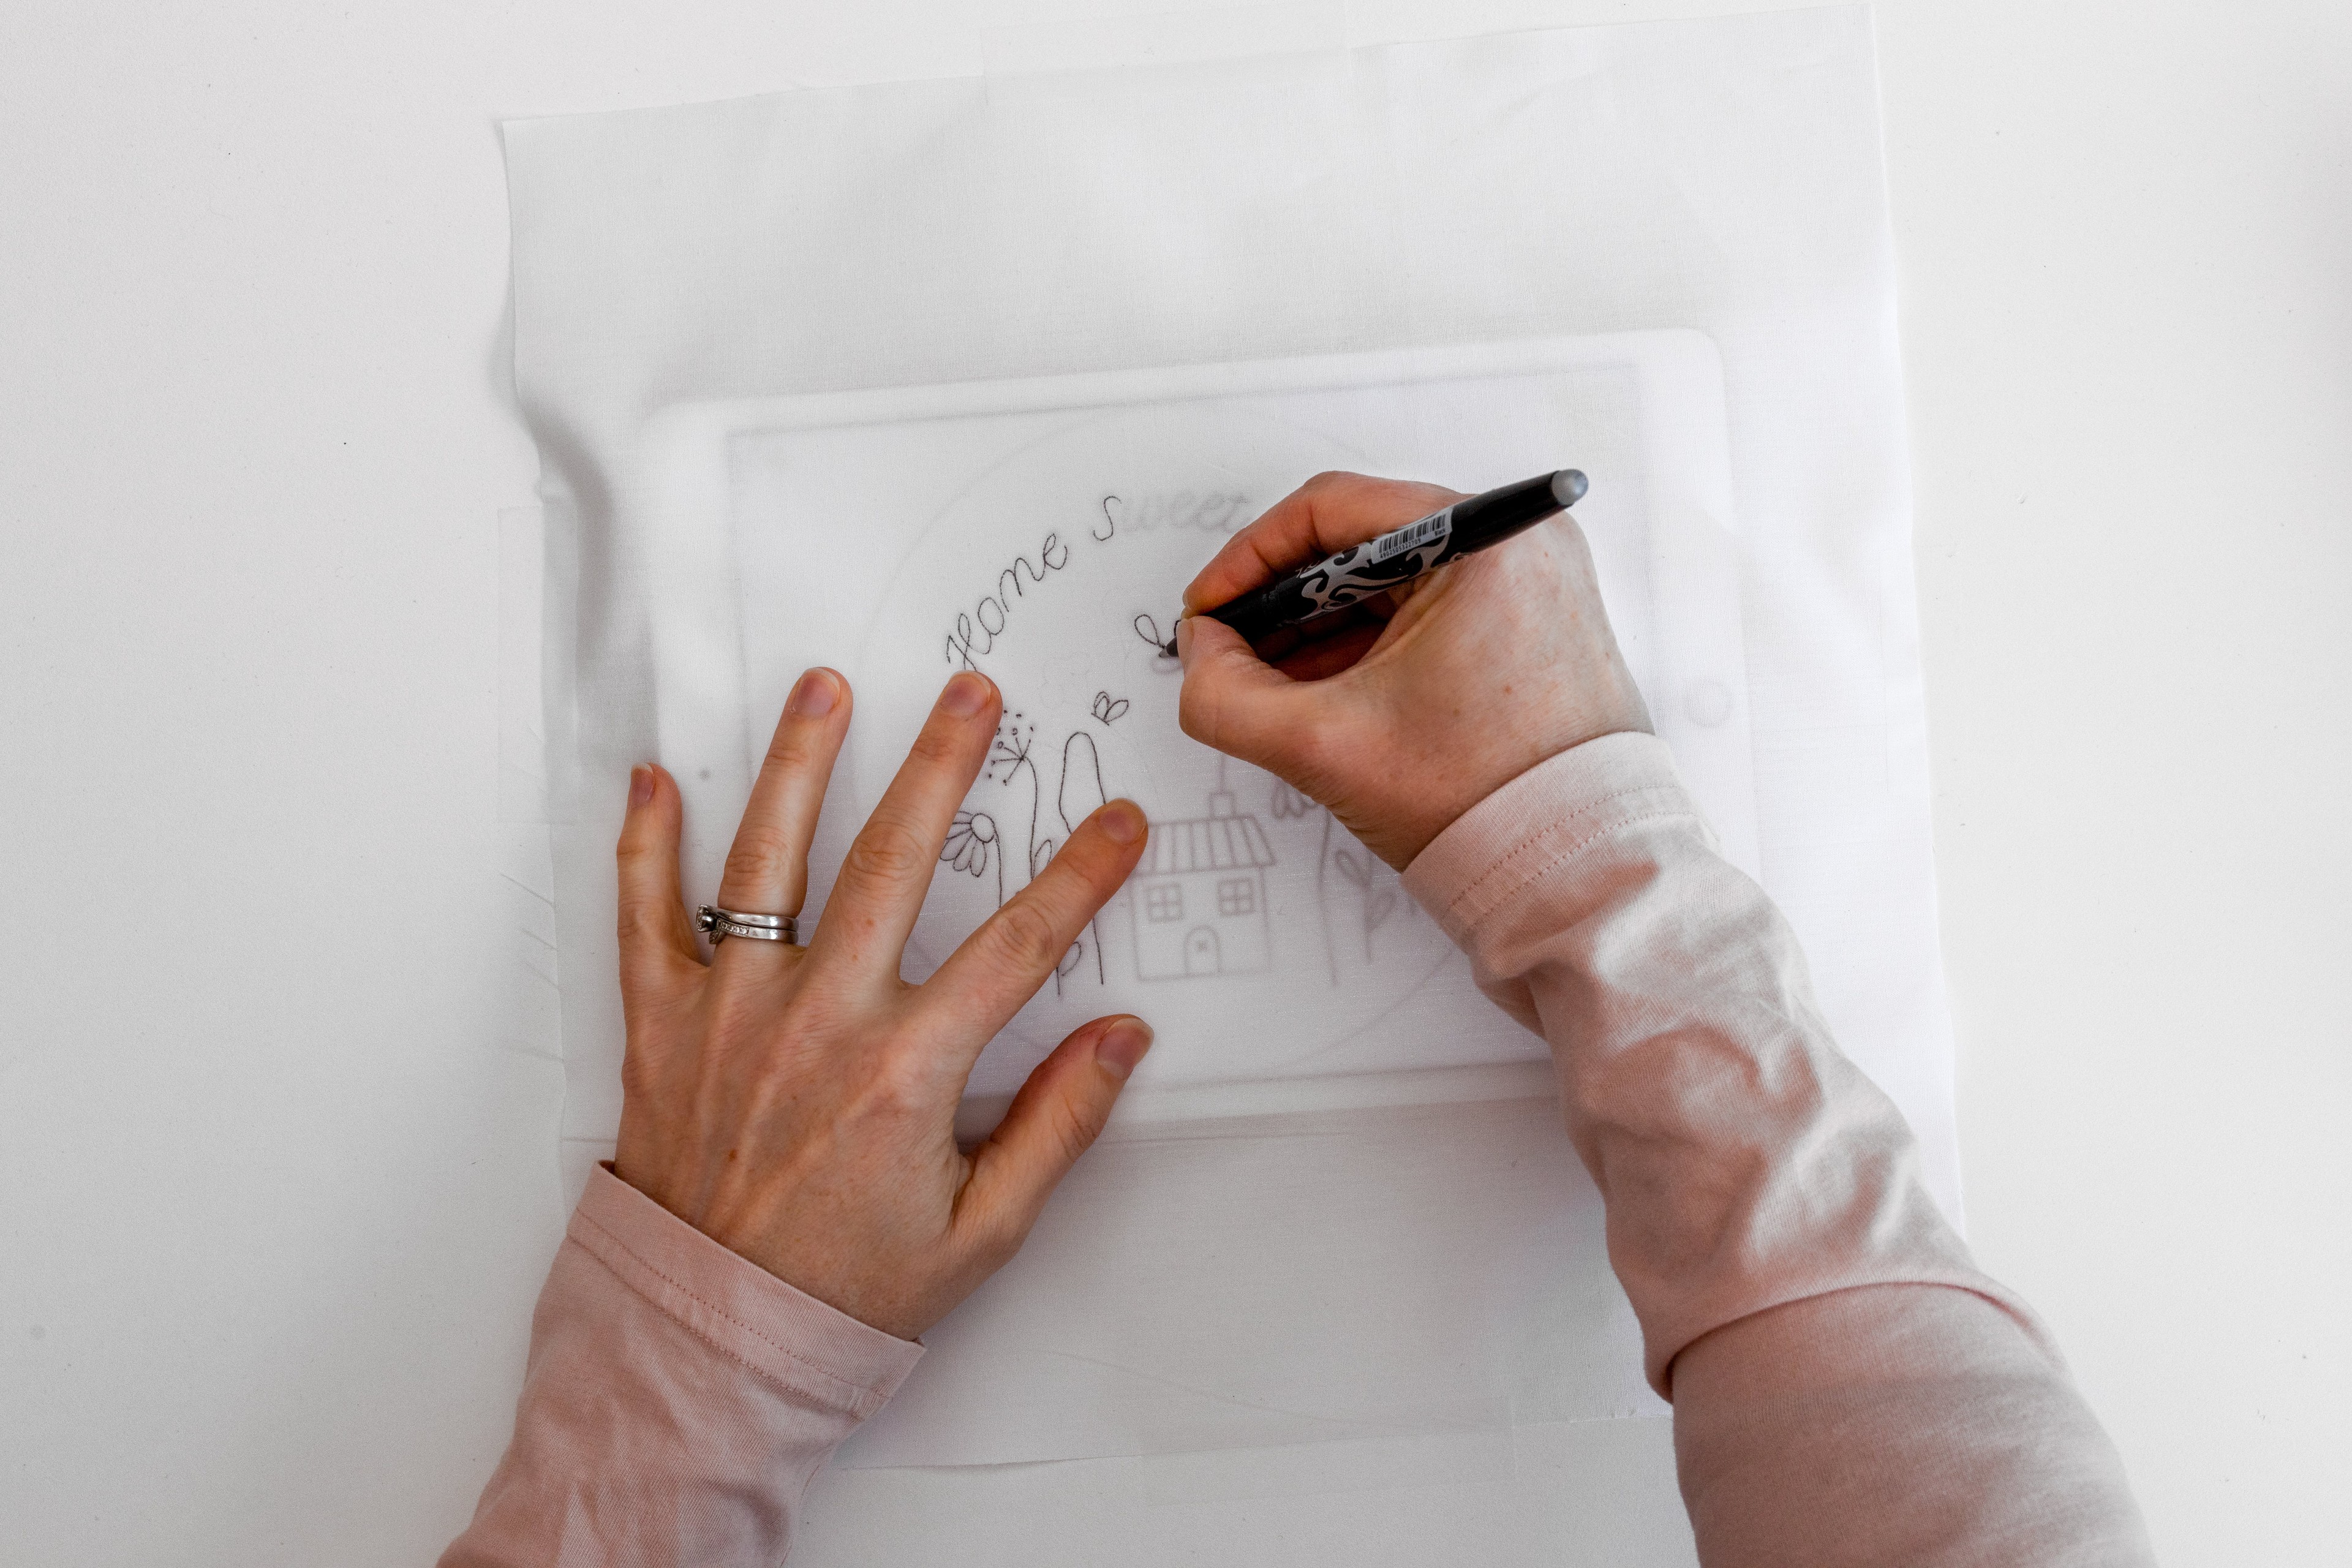 A hand draws a pattern on fabric using a tablet as a light source.